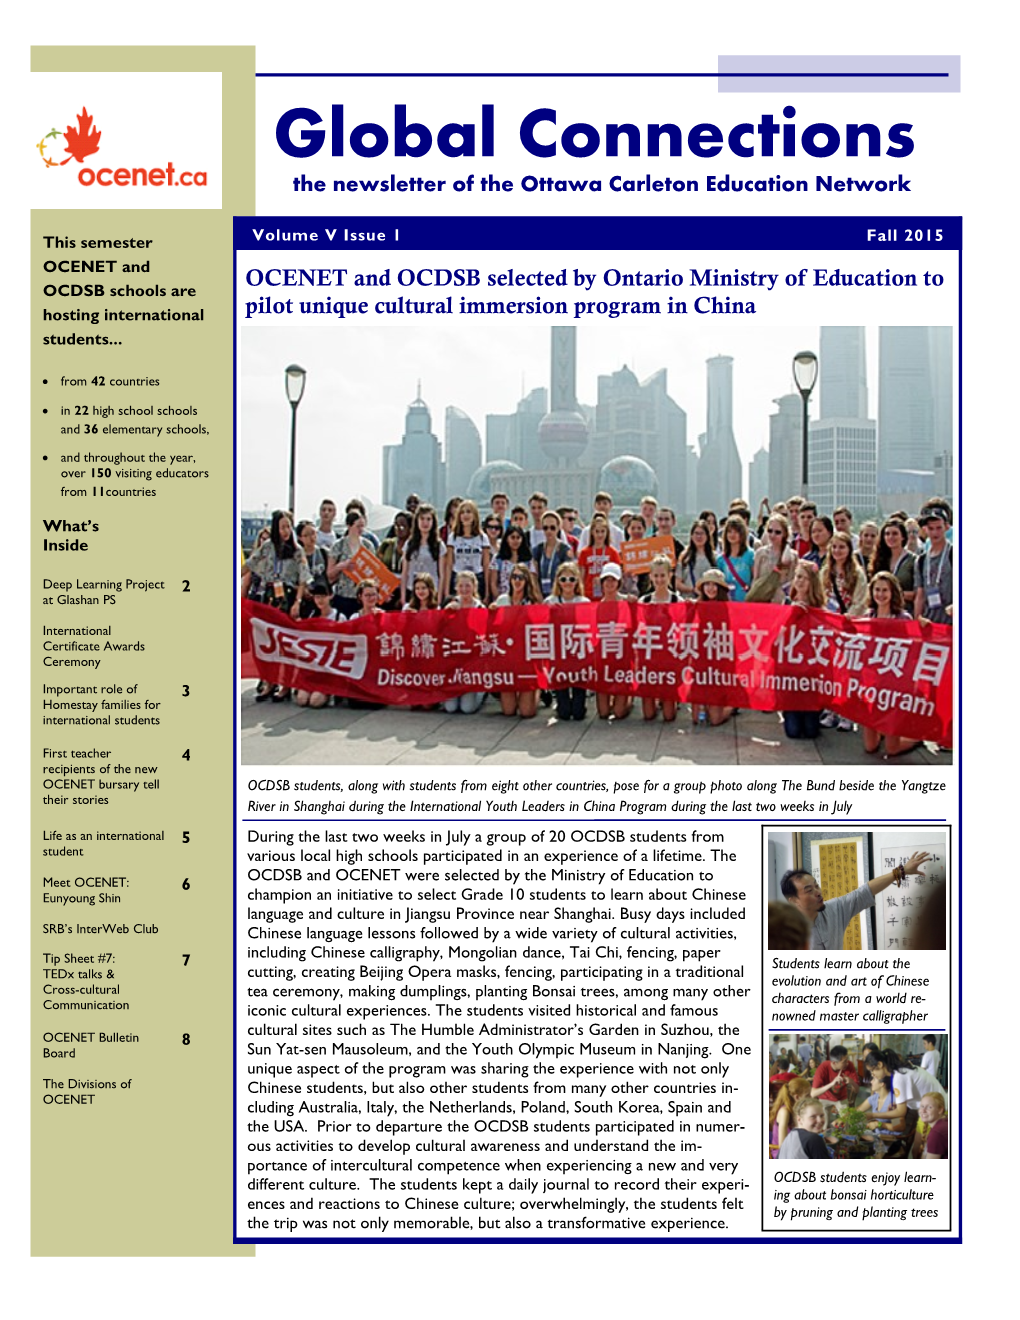 Global Connections the Newsletter of the Ottawa Carleton Education Network